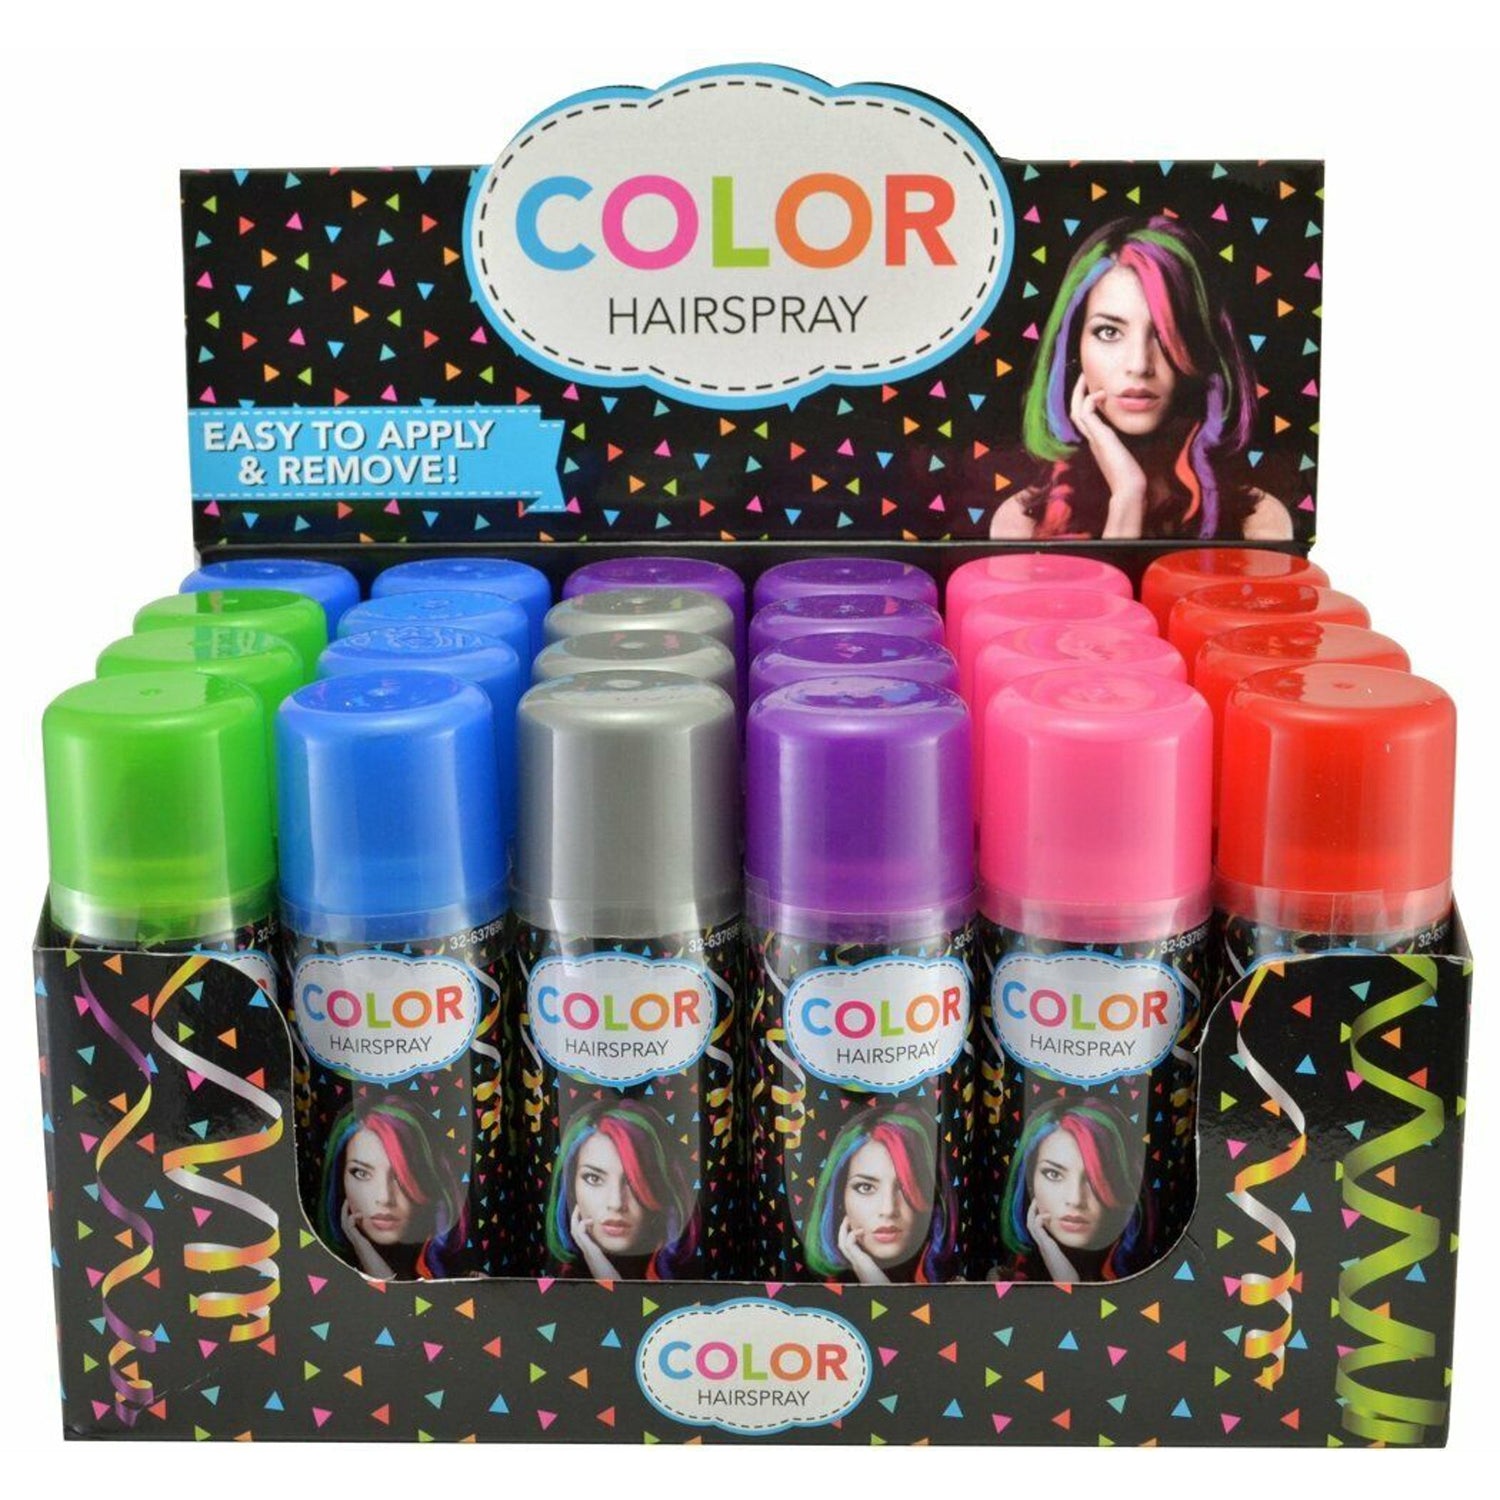 COLOR HAIRSPRAY - VIP Extensions